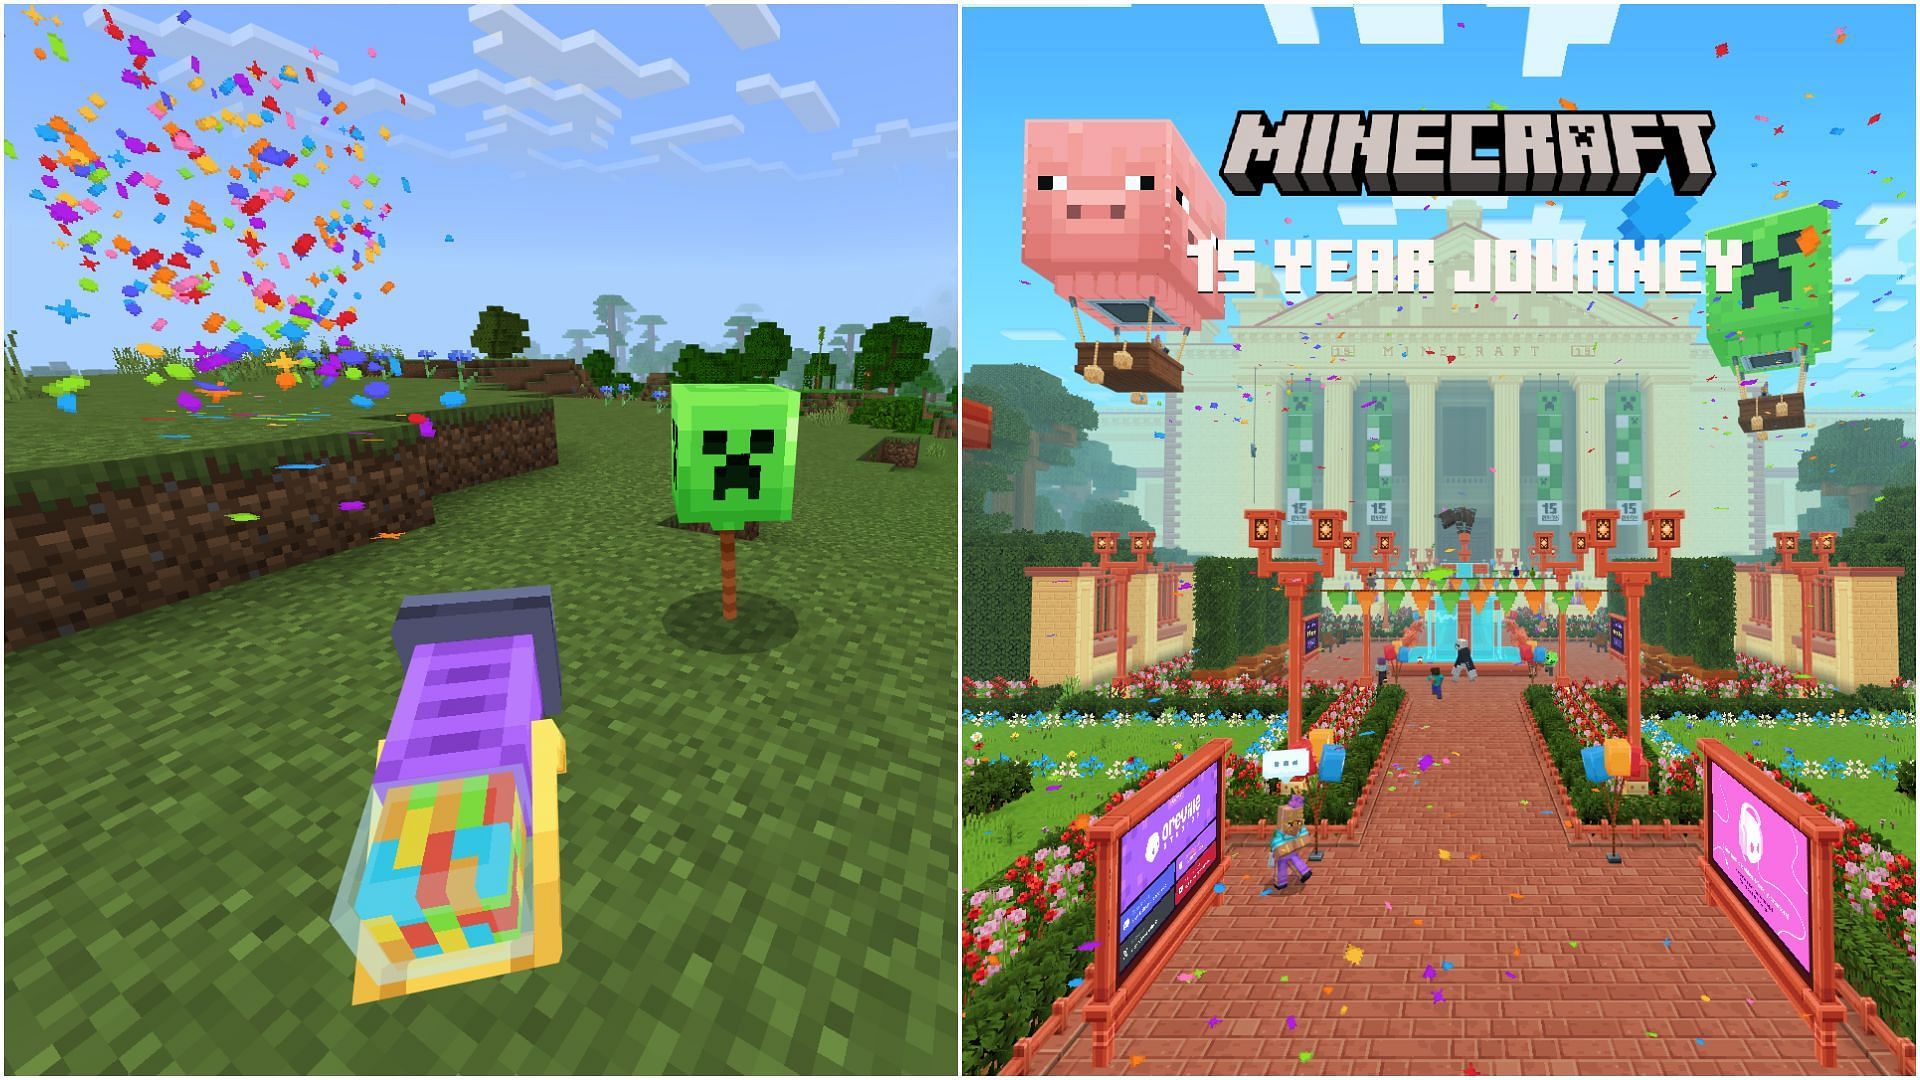 Bedrock Edition has special map and add-ons to celebrate the 15th anniversary (Image via Mojang Studios)